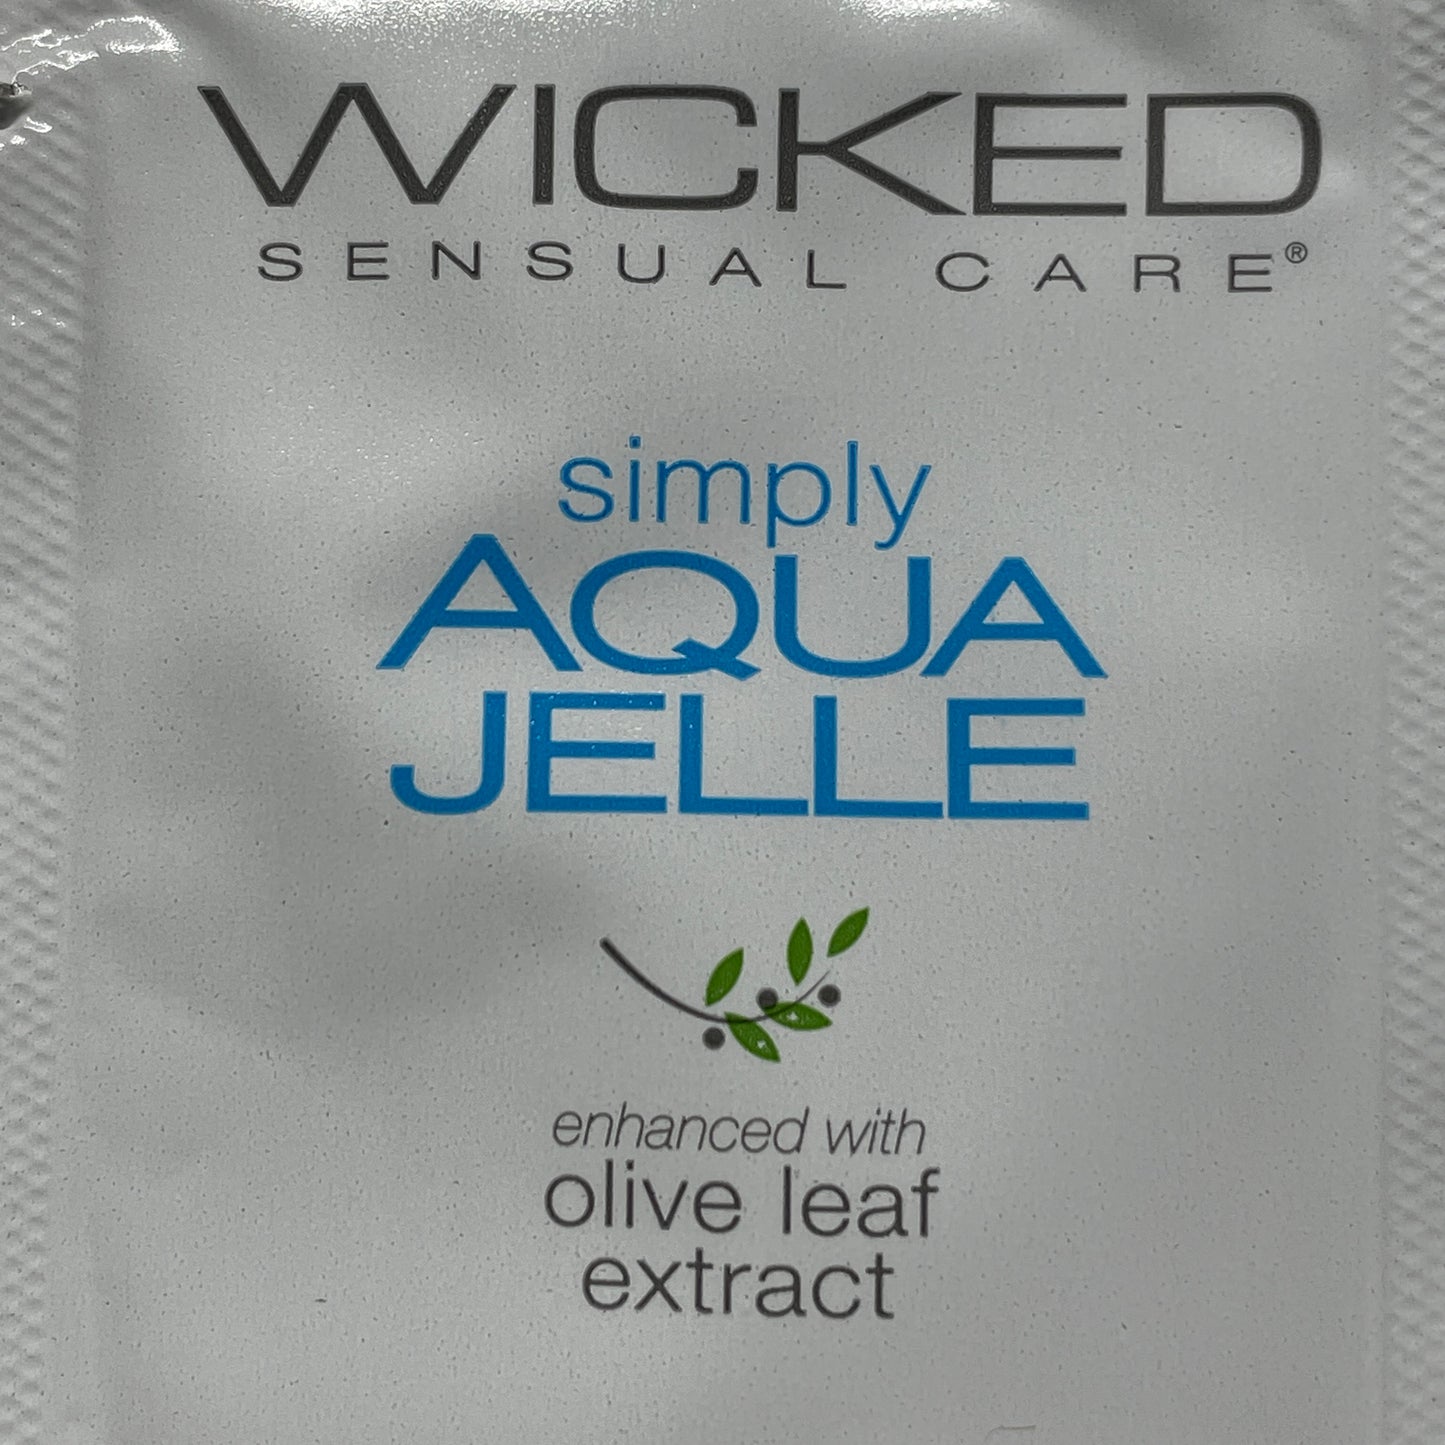 WICKED SENSUAL CARE 144-PACK Simply Aqua Jelle Clean & Simple Water Based Gel Lubricant .1 oz (New)